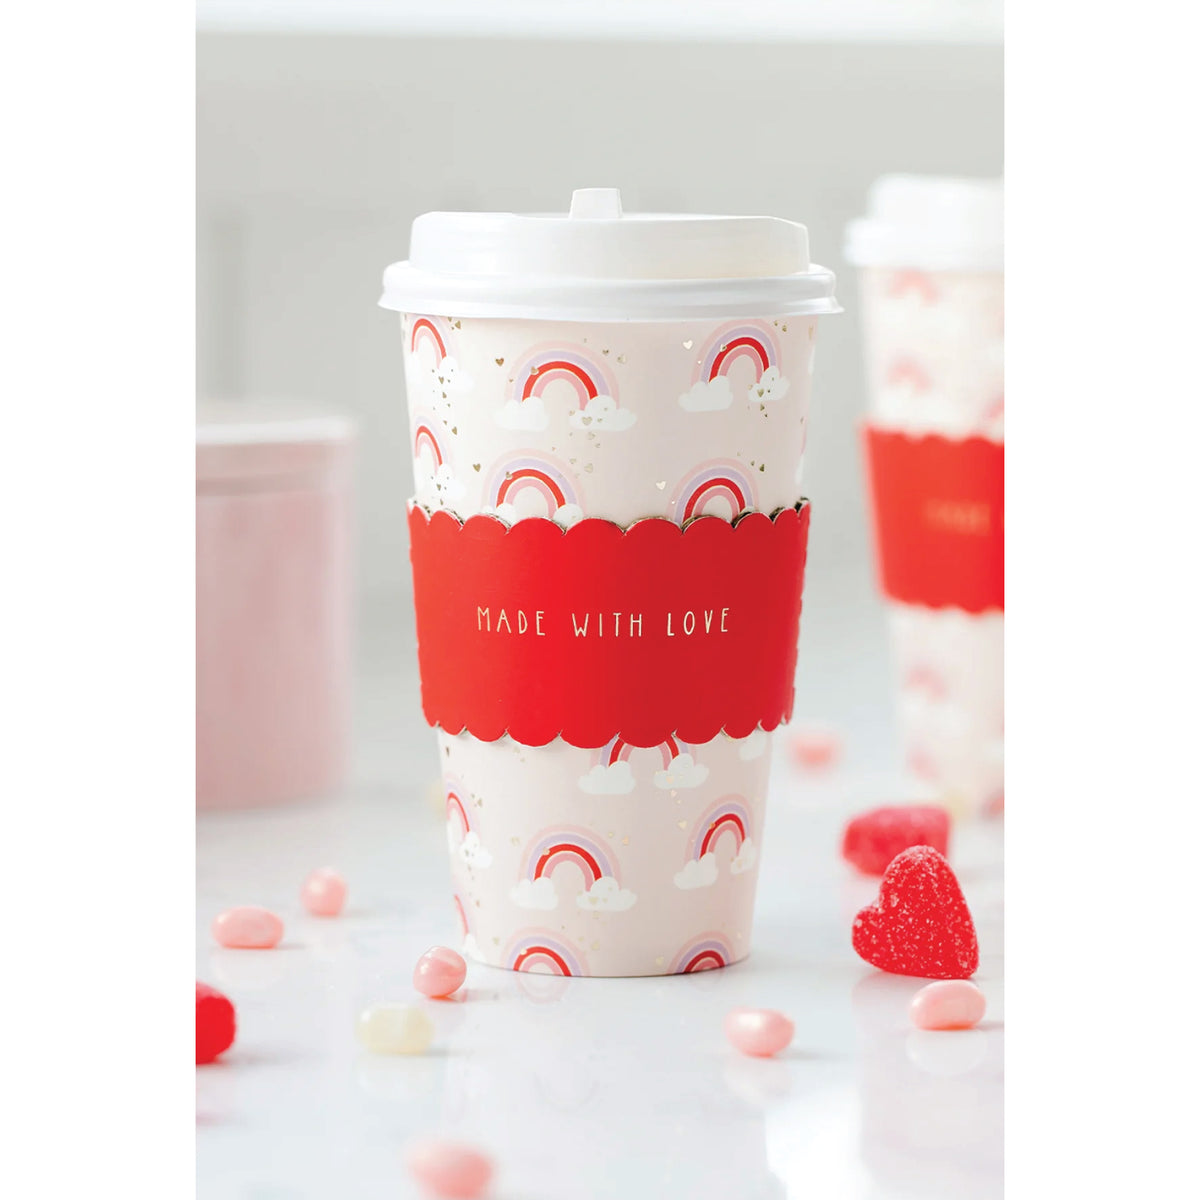 Ligegyldighed systematisk Tæt Pink Made with Love Rainbow Coffee Cups Lids 8ct | The Party Darling